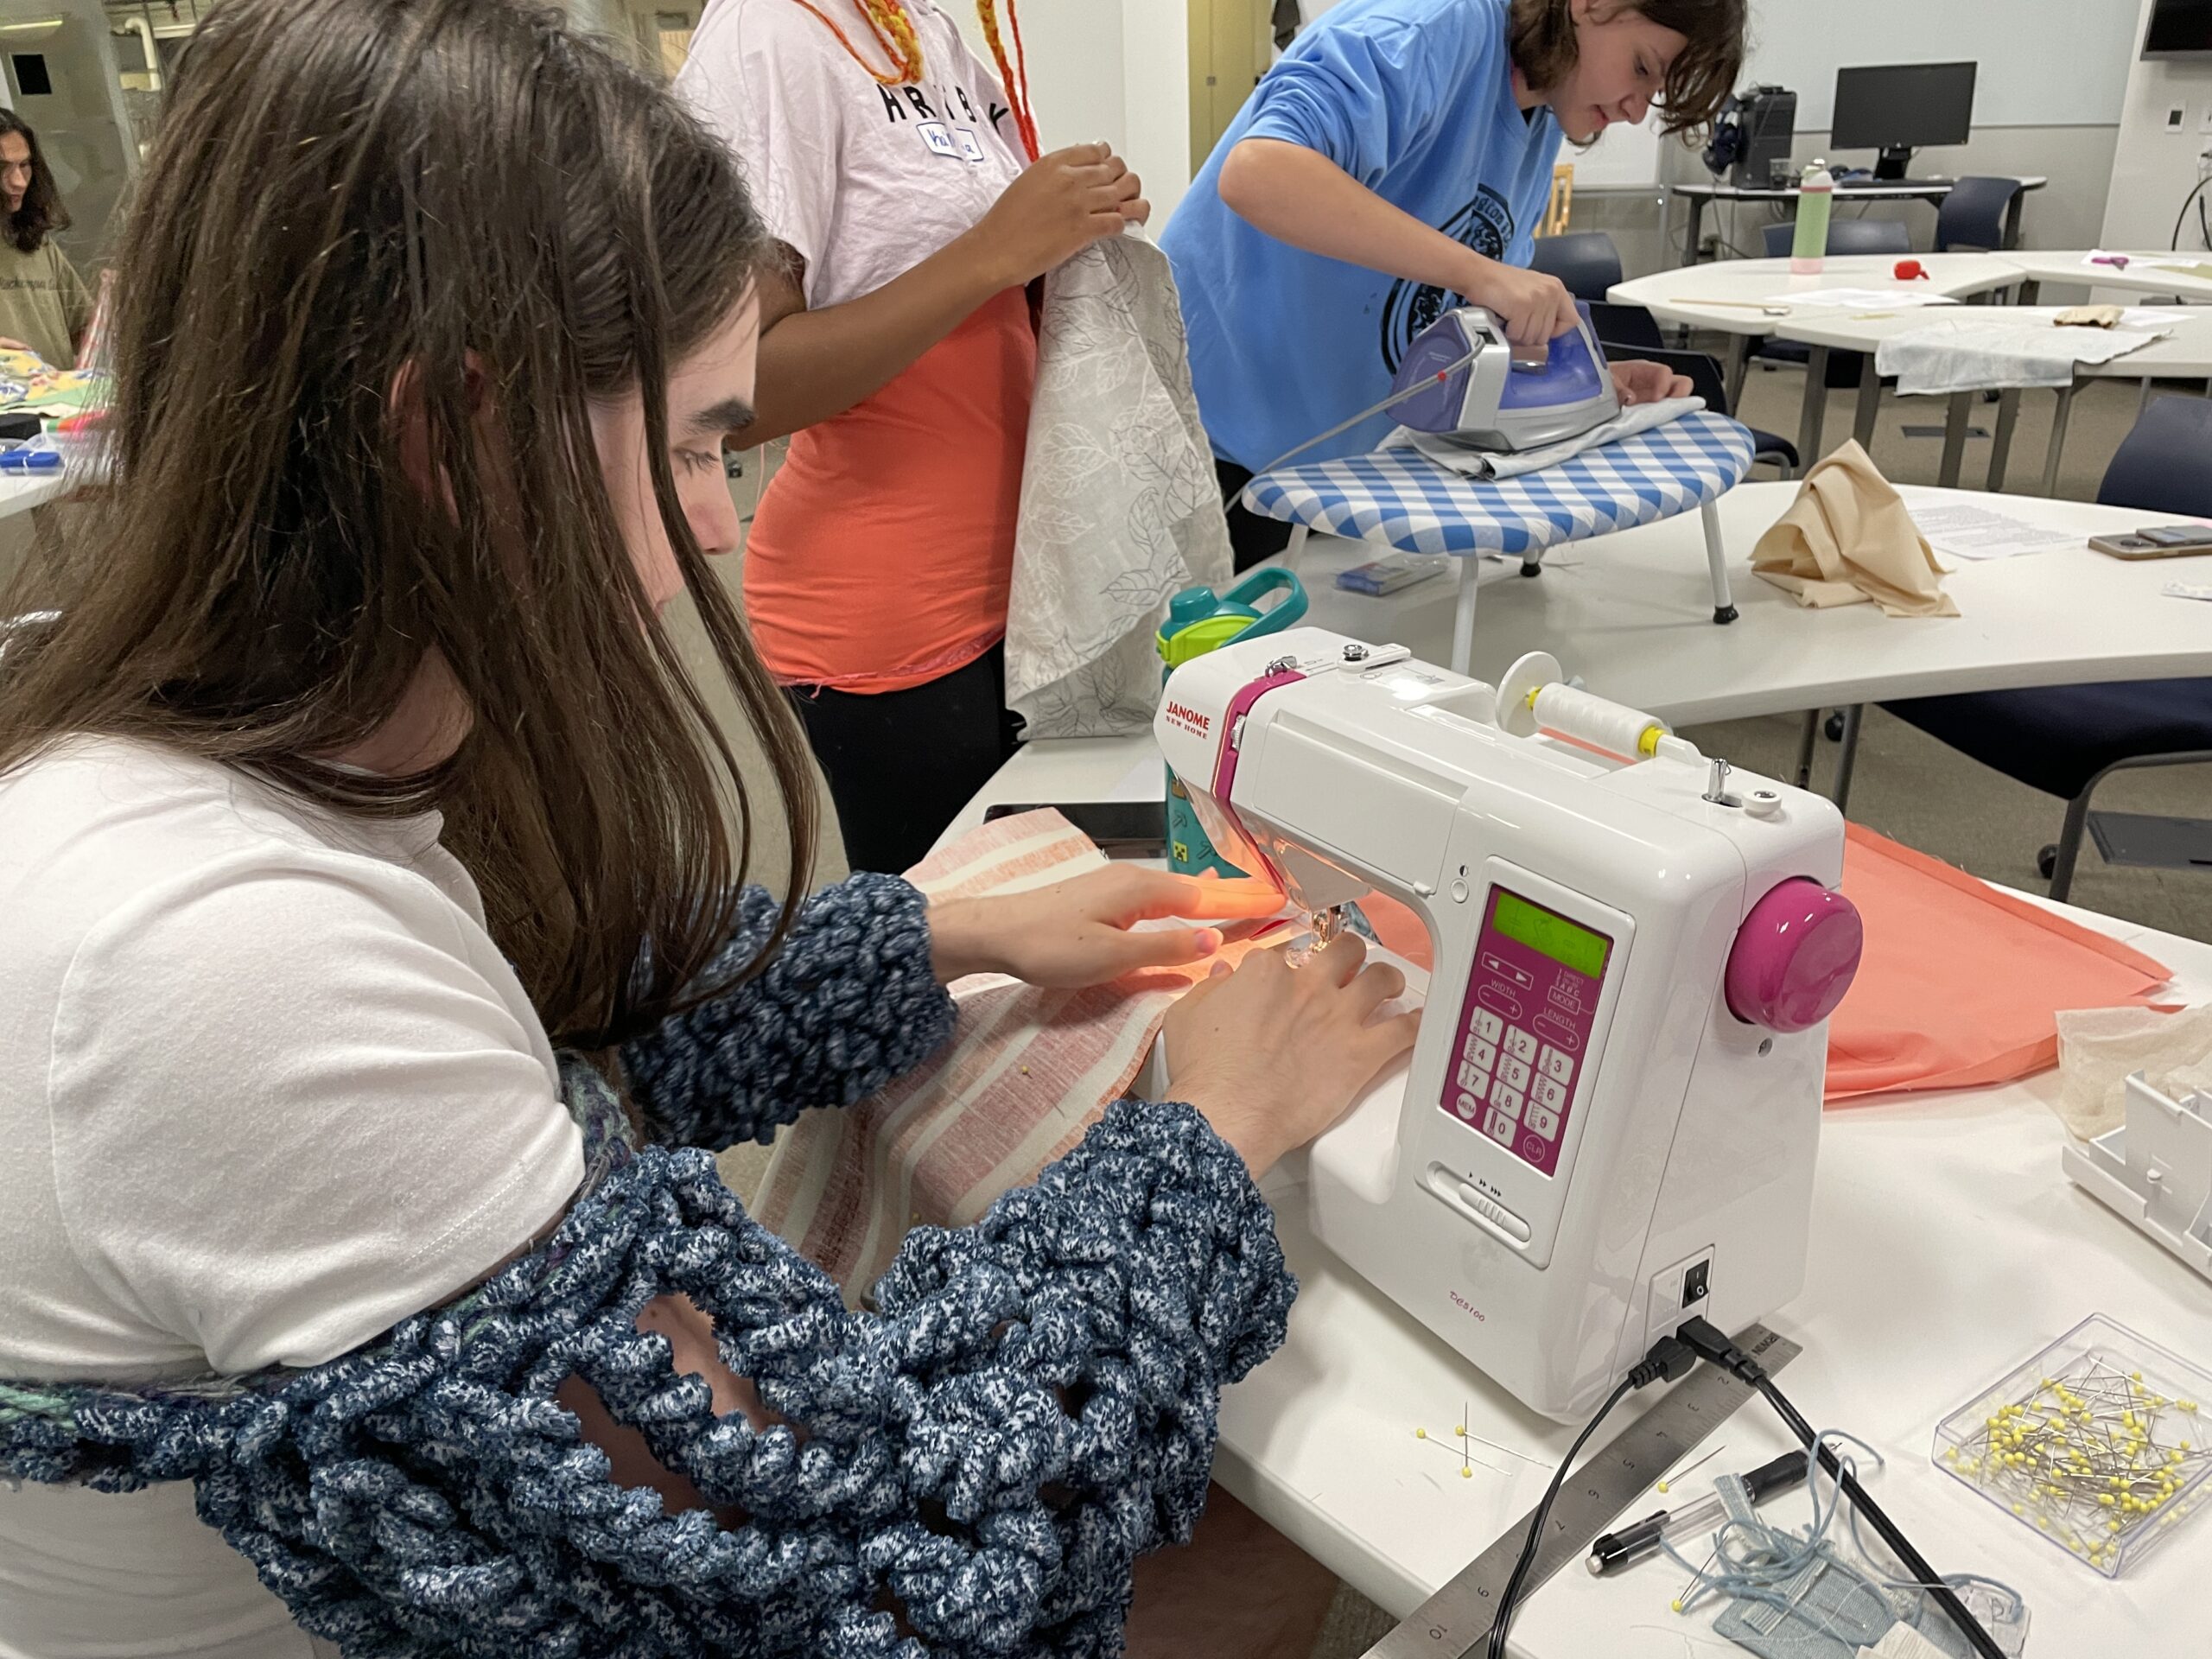 W&L student using a sewing machine in the IQ Center during the "Make a Tote Bag" workshop.